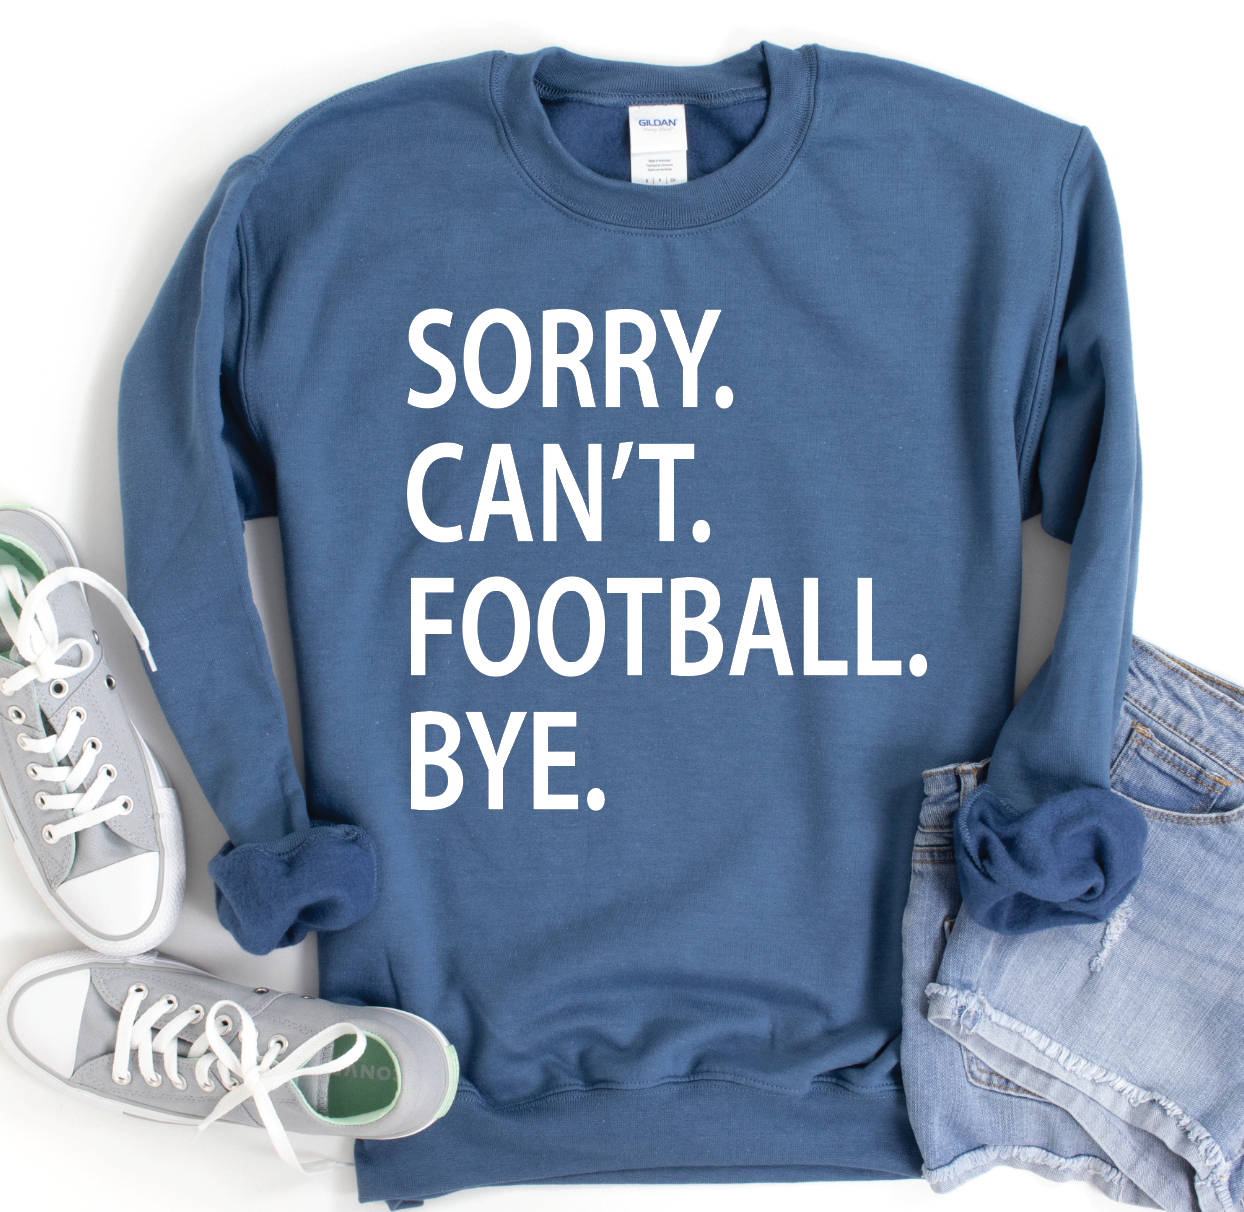 Sorry. Can't. Football. Bye. preorder